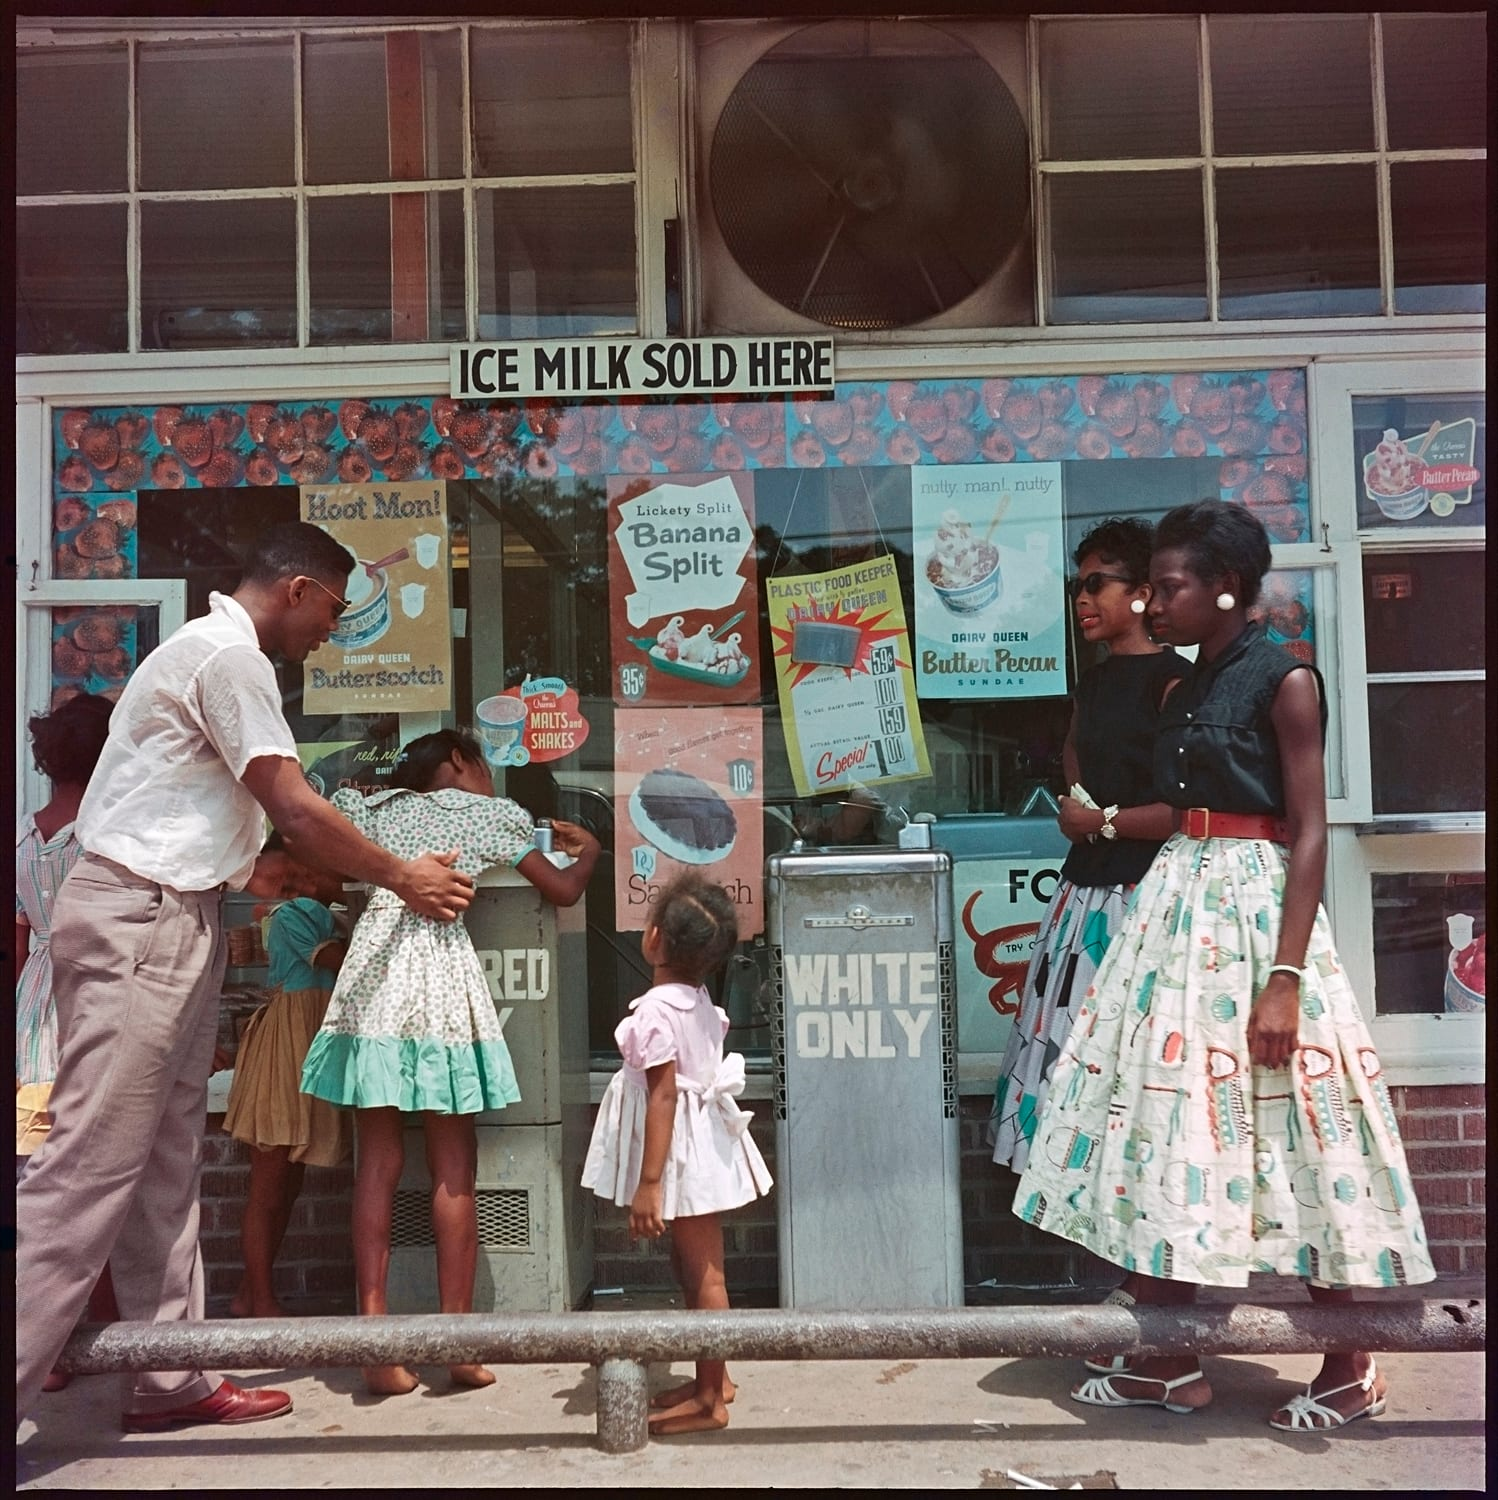  Gordon Parks At Segregated Drinking Fountain, Mobile, Alabama Edition: 10/25 Archival pigment print  14 x 14 in. (image size)  The Do Good Fund, Inc., 2015-005 Photograph by Gordon Parks Courtesy of and copyright The Gordon Parks Foundation 